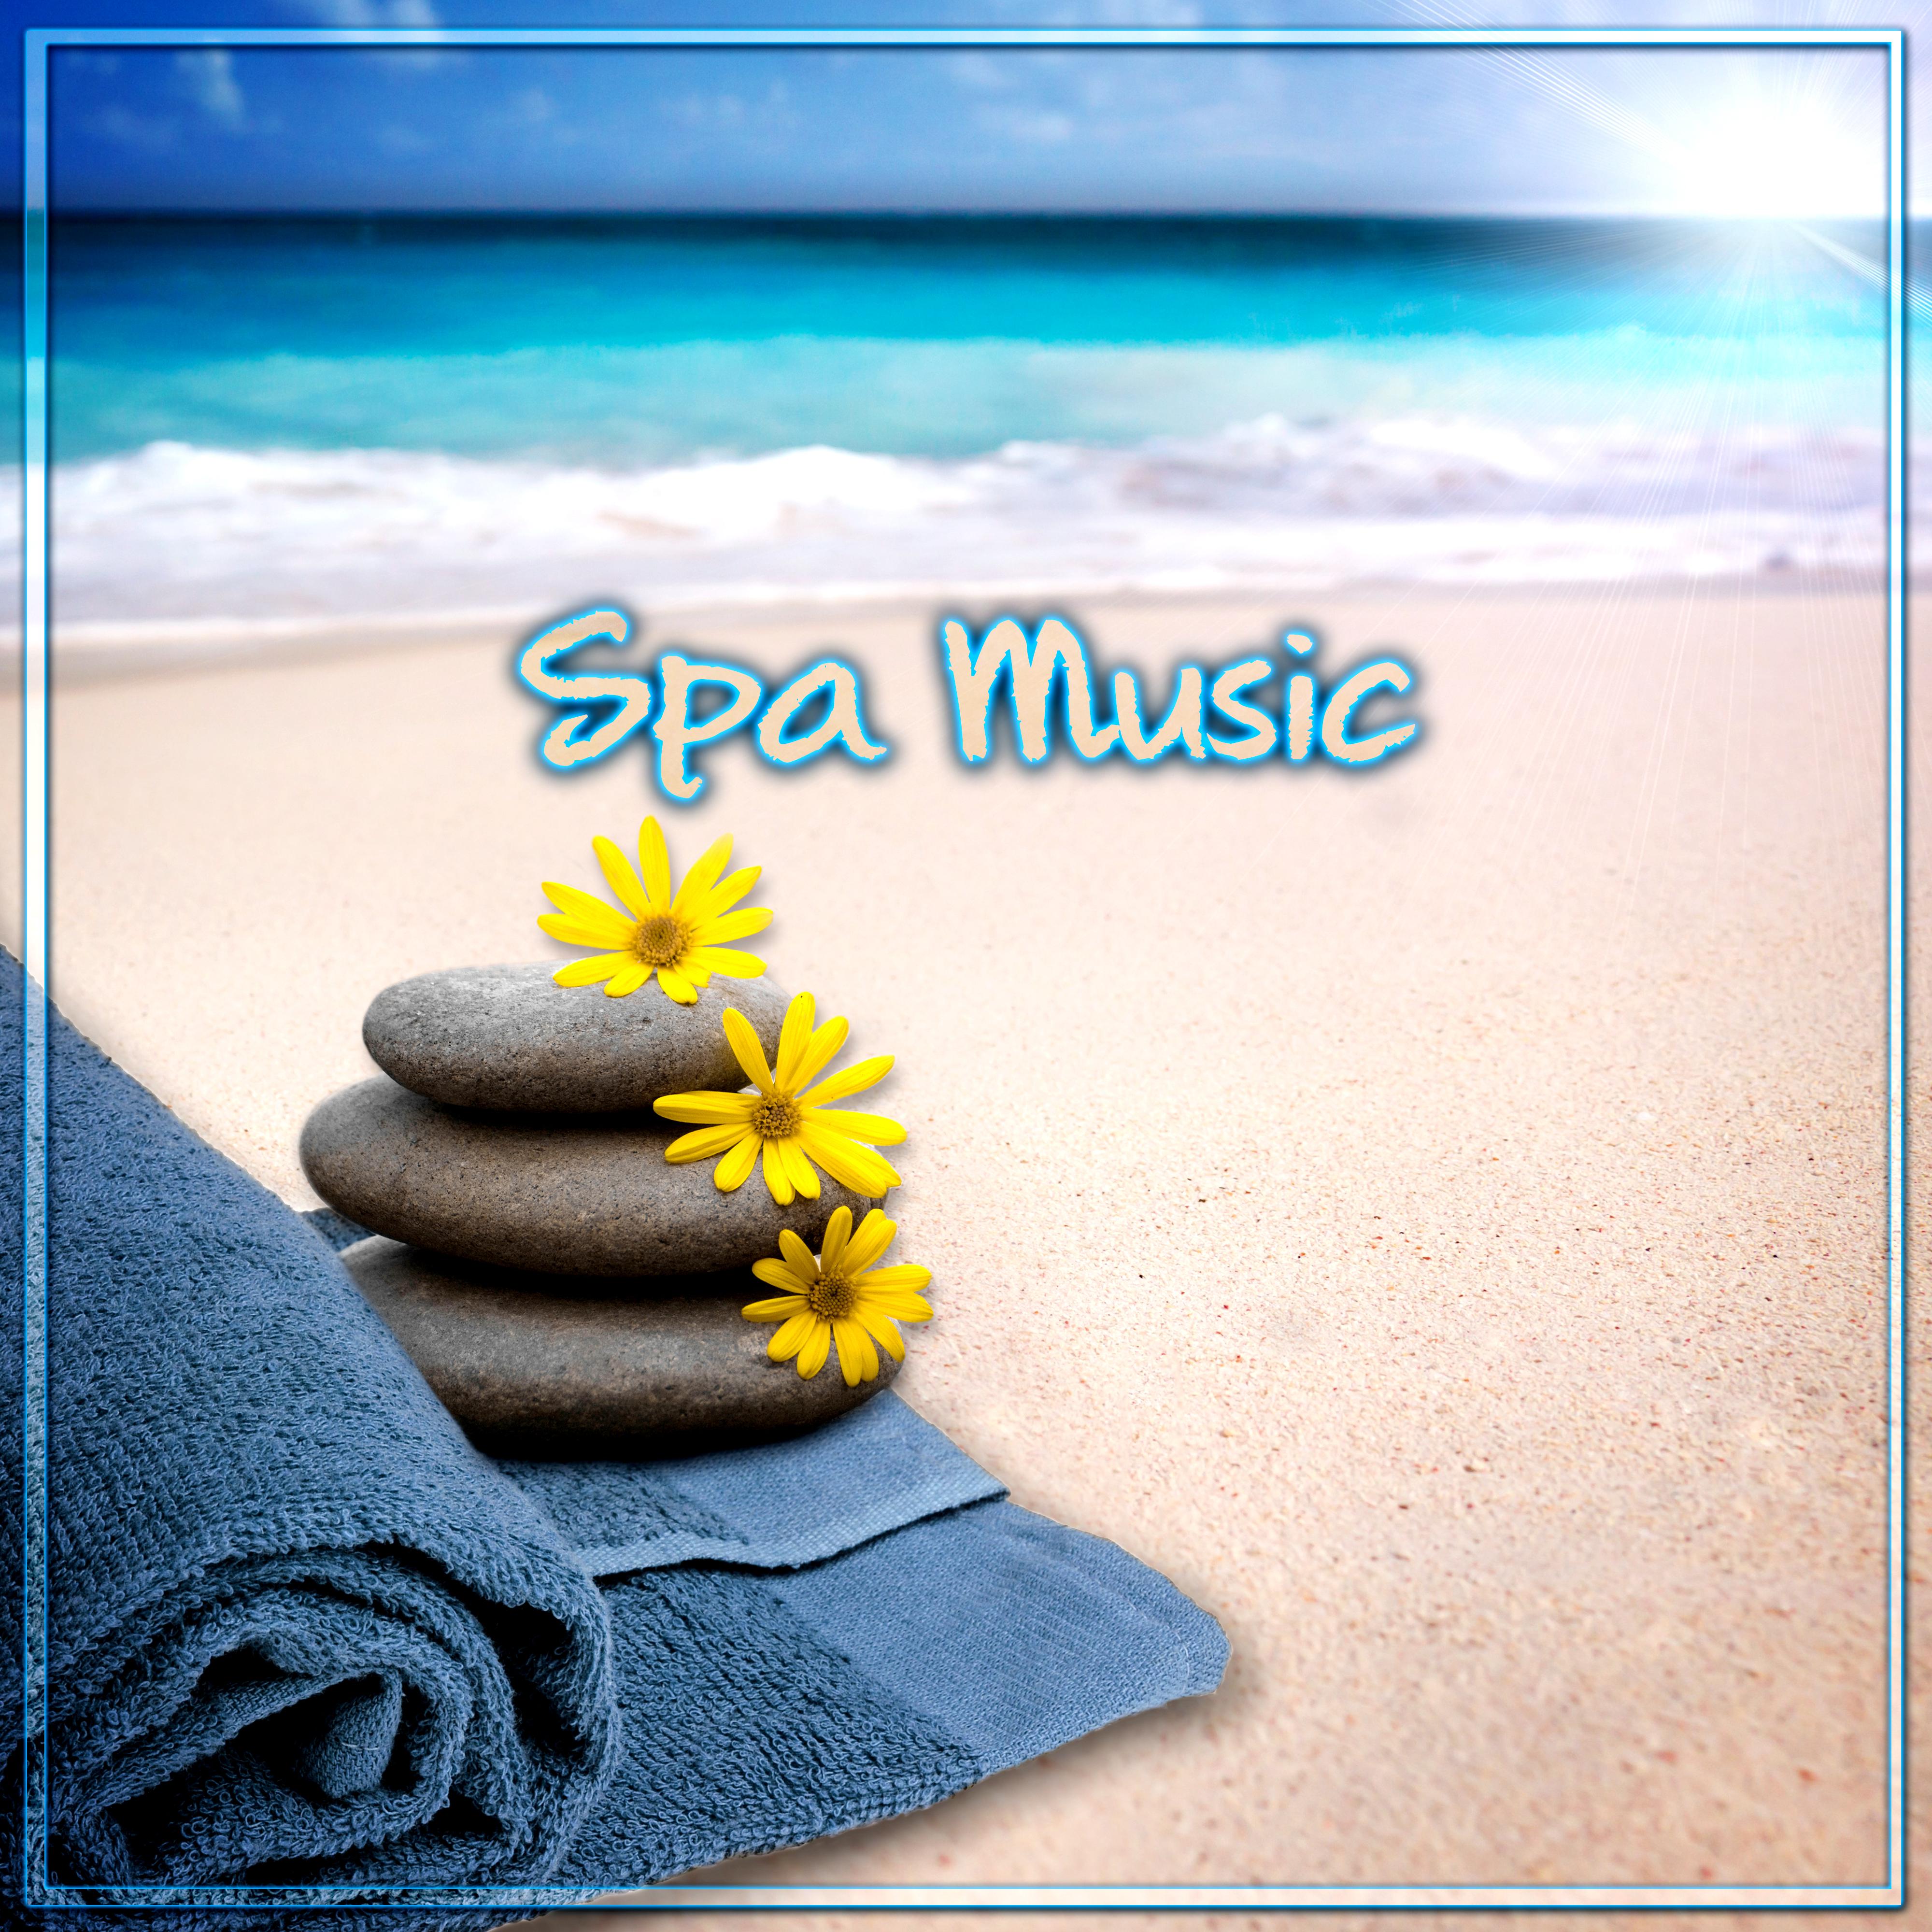 Spa Music  Healing Music for Massage, Wellness, Meditation, Yoga Classes, Deep Relaxation, Beauty Sleep, Nature Sounds for WellBeing